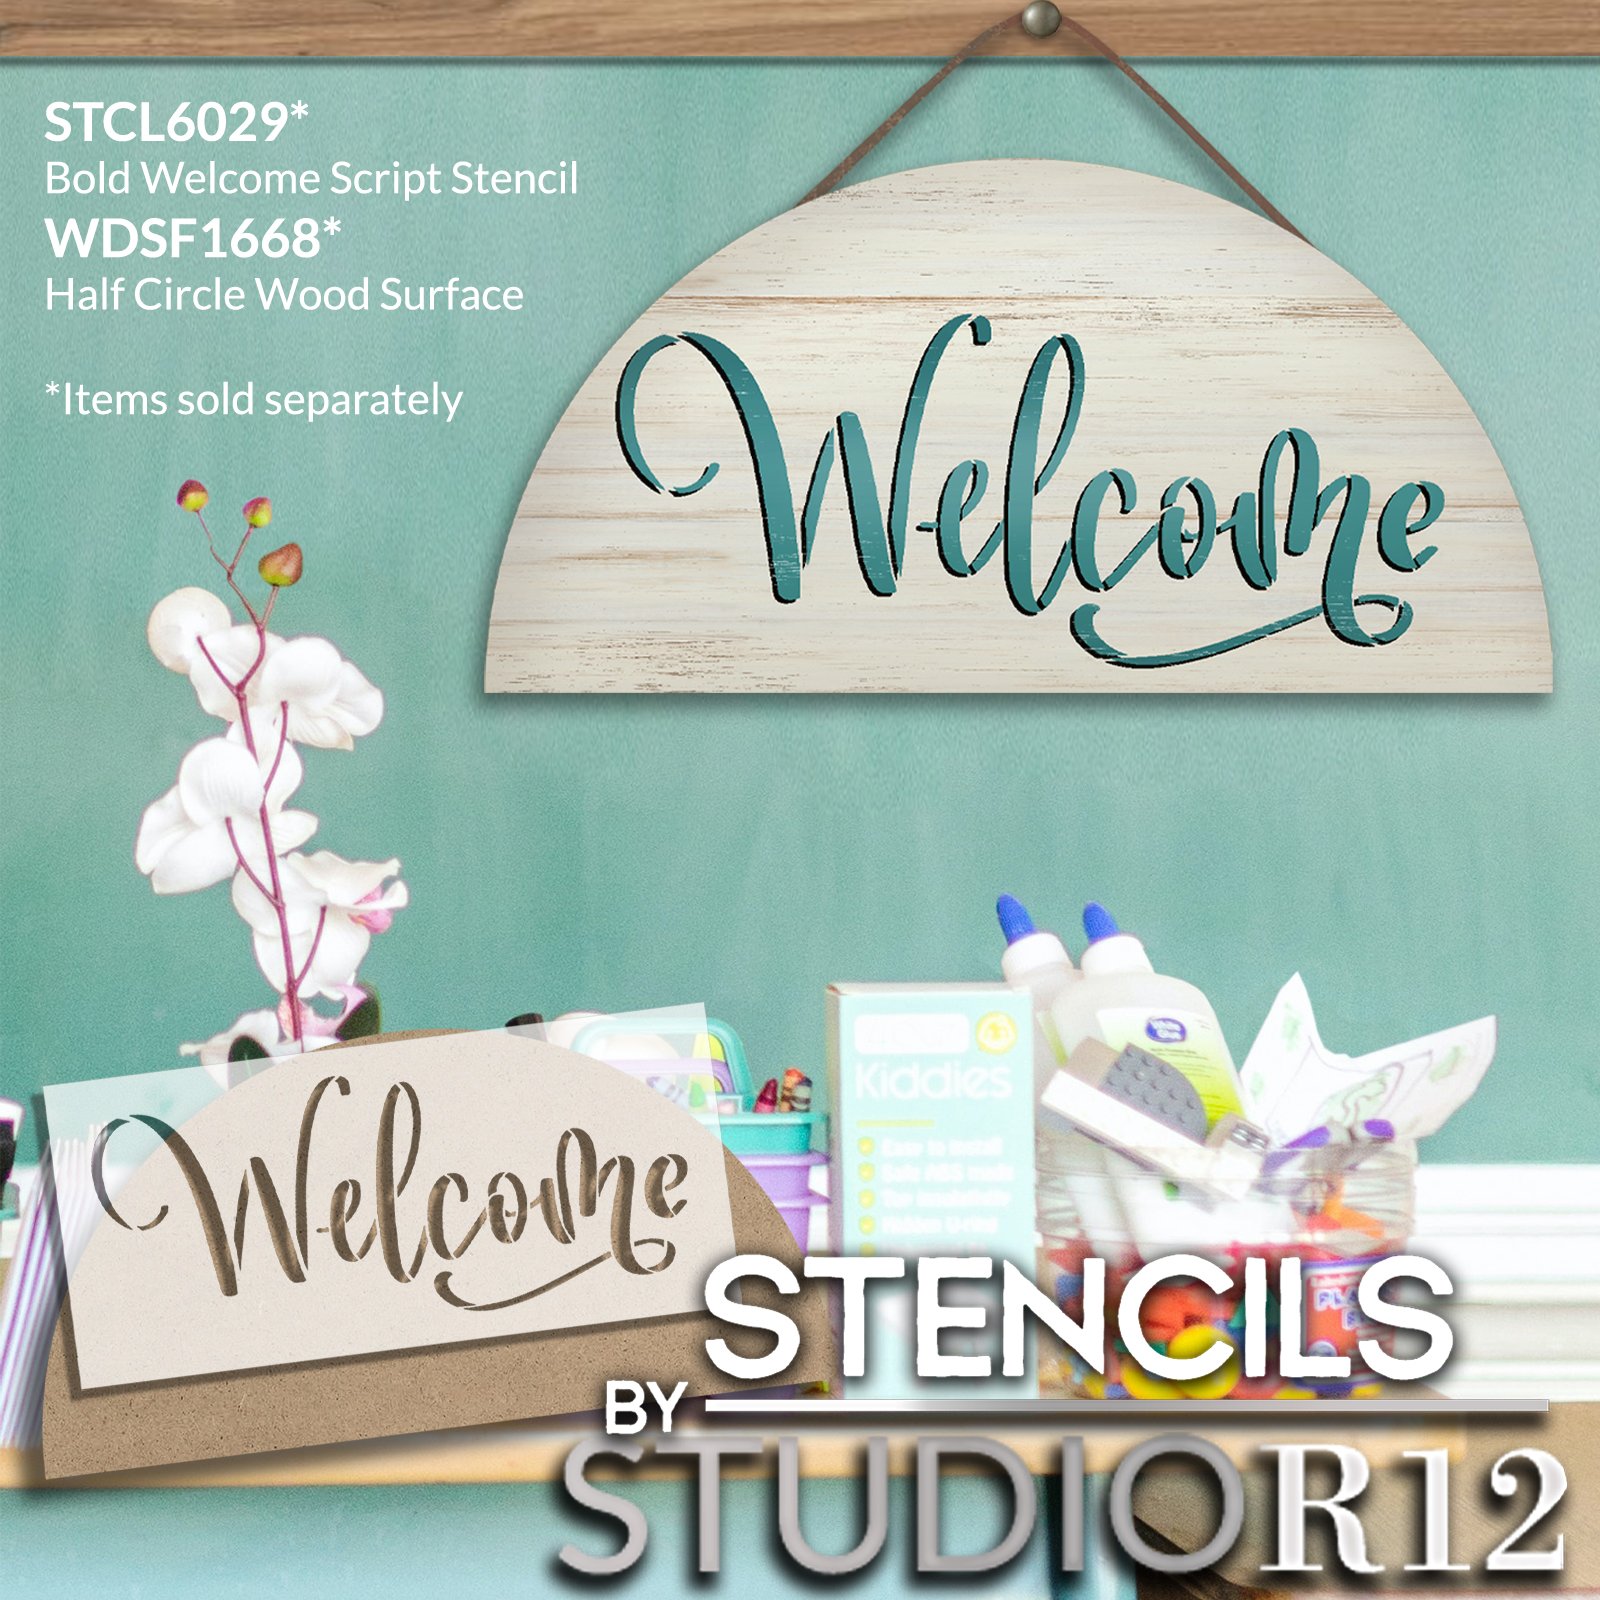 Bold Welcome Script Stencil by StudioR12 | Craft DIY Farmhouse Home Decor | Paint Wood Sign | Reusable Mylar Template | Select Size